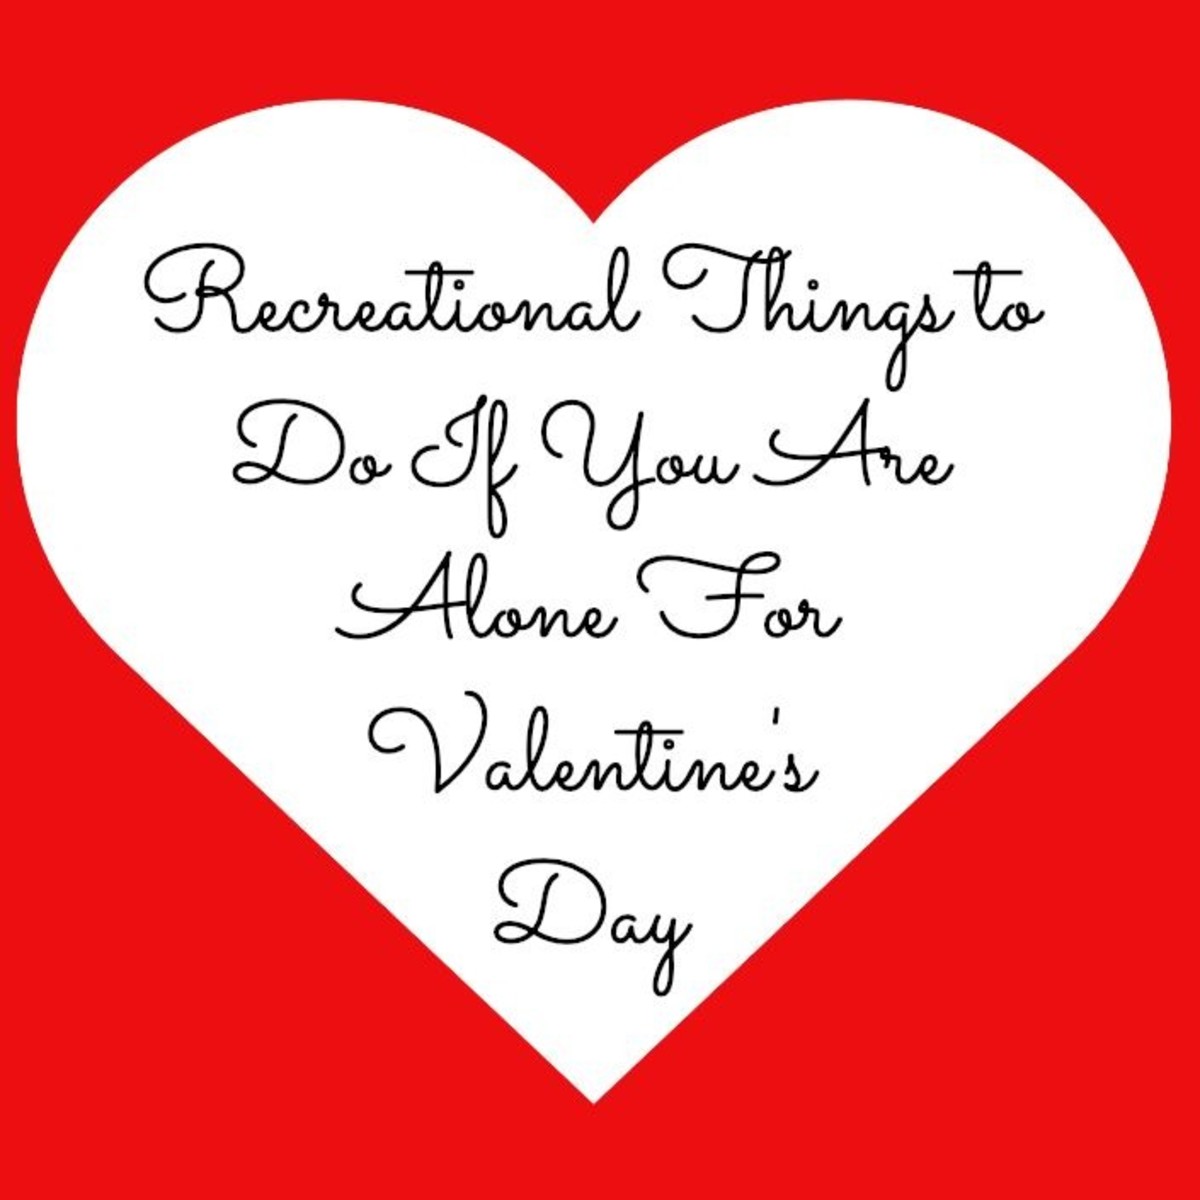 things-to-do-on-valentines-day-if-you-are-alone